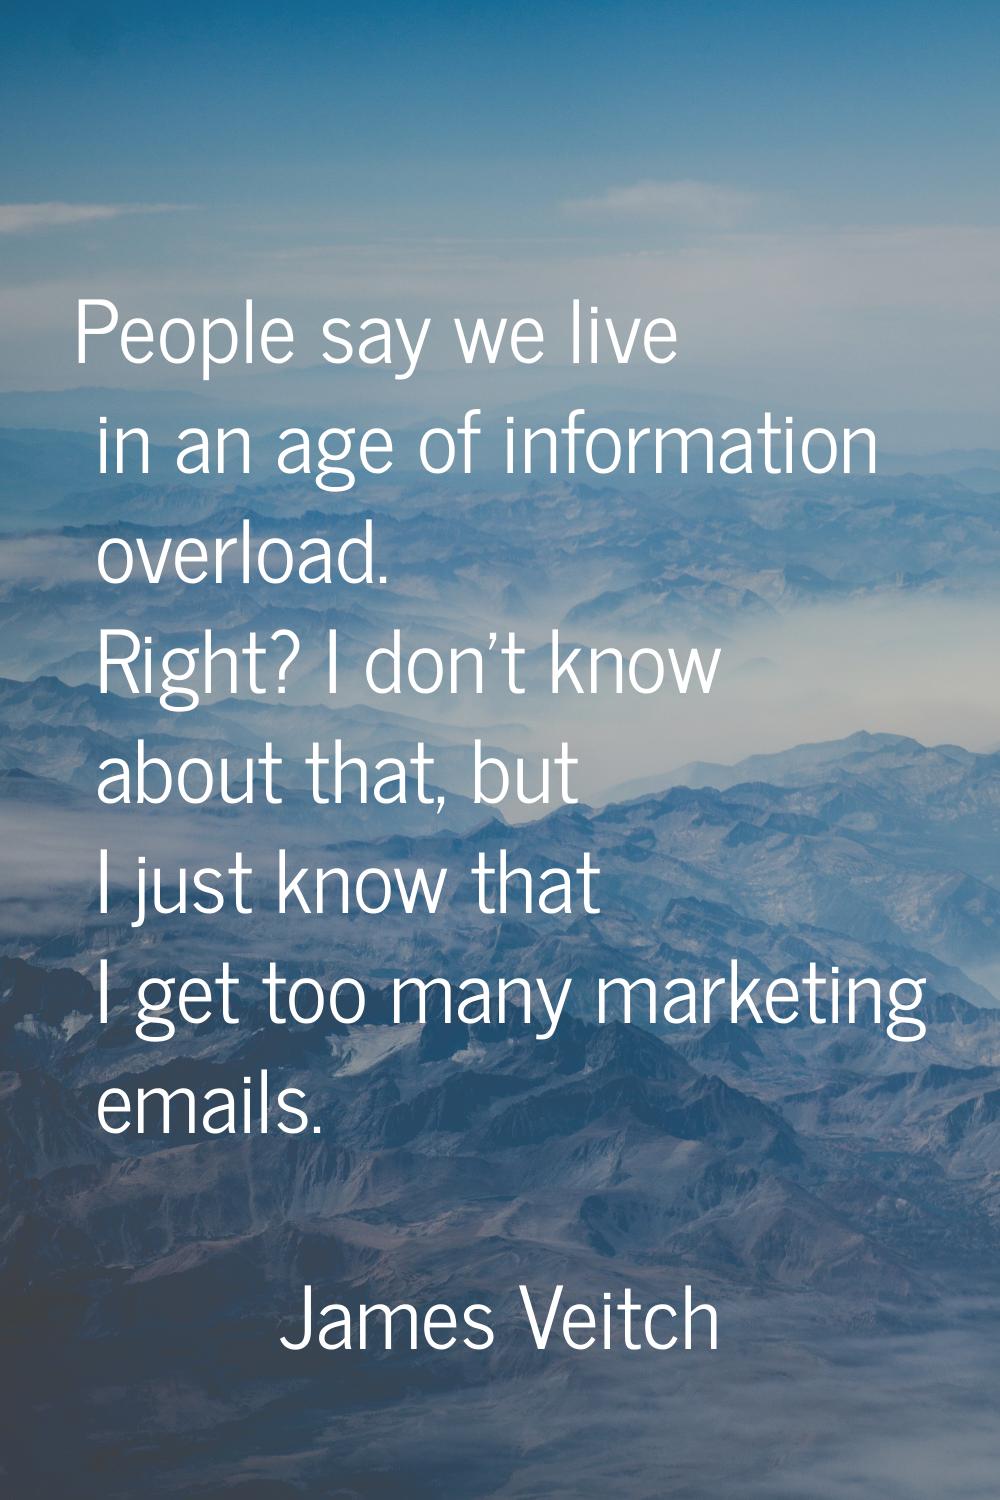 People say we live in an age of information overload. Right? I don't know about that, but I just kn